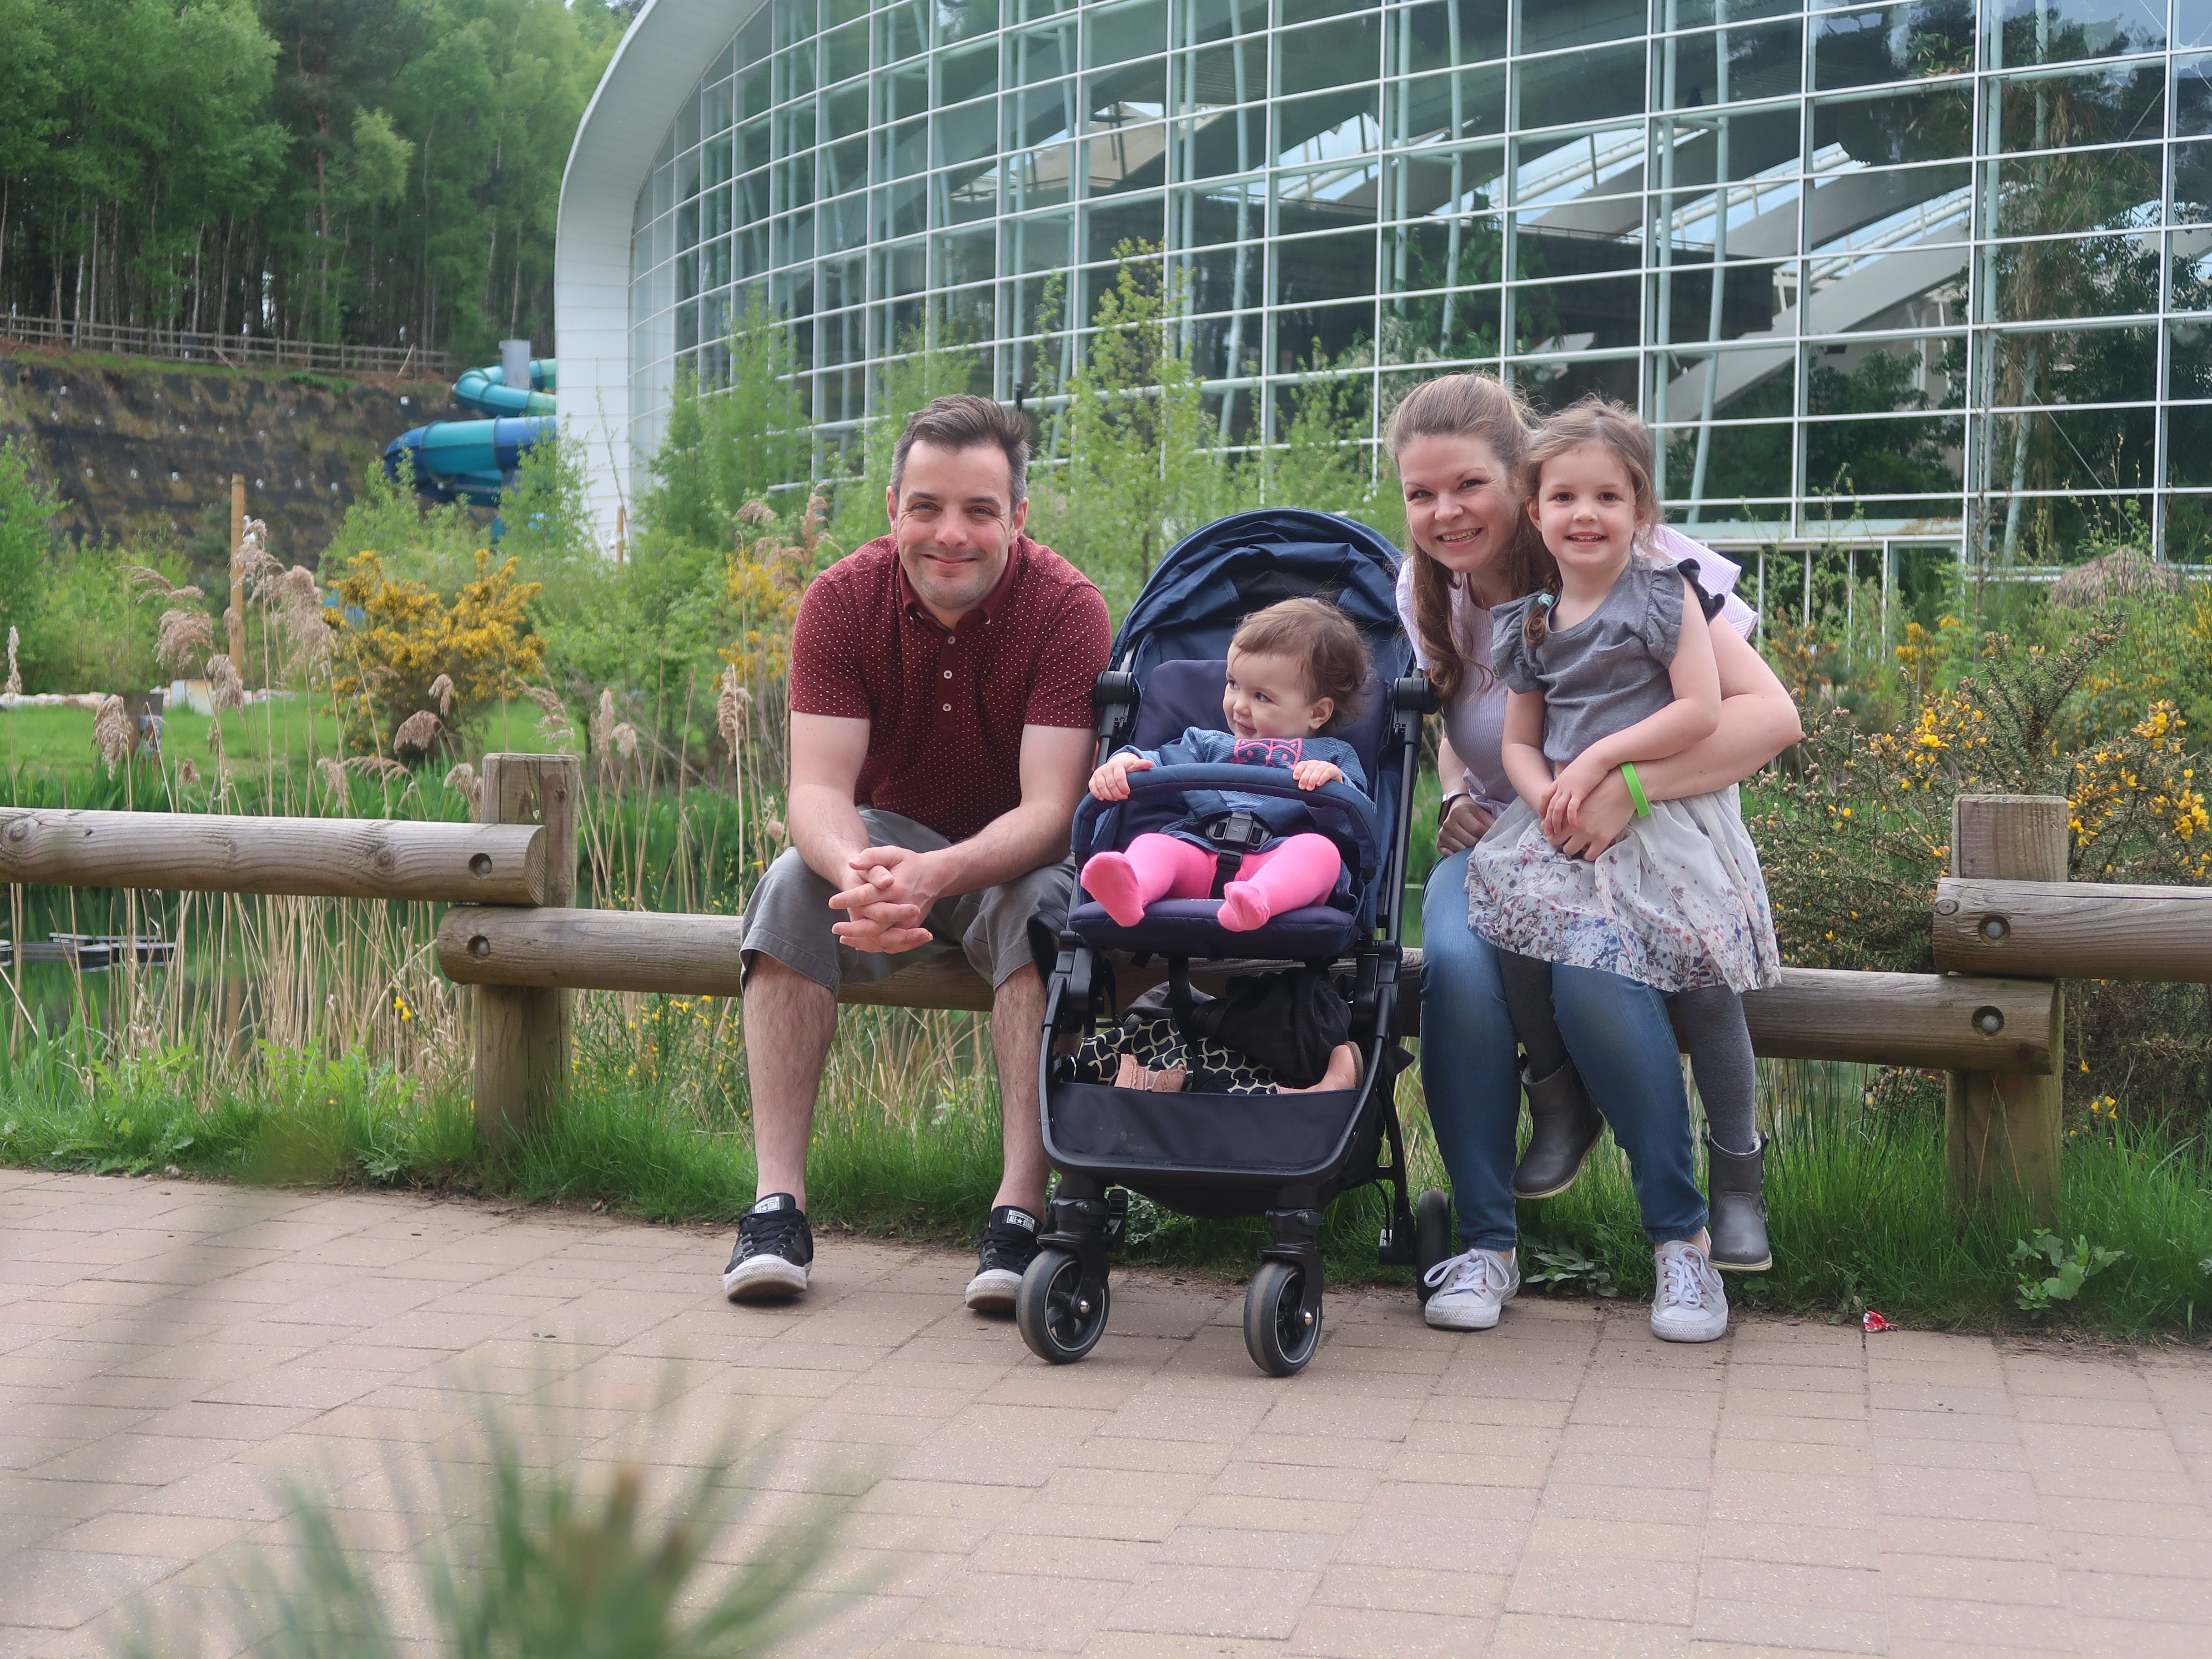 Top Tips for Center Parcs with Babies & Toddlers